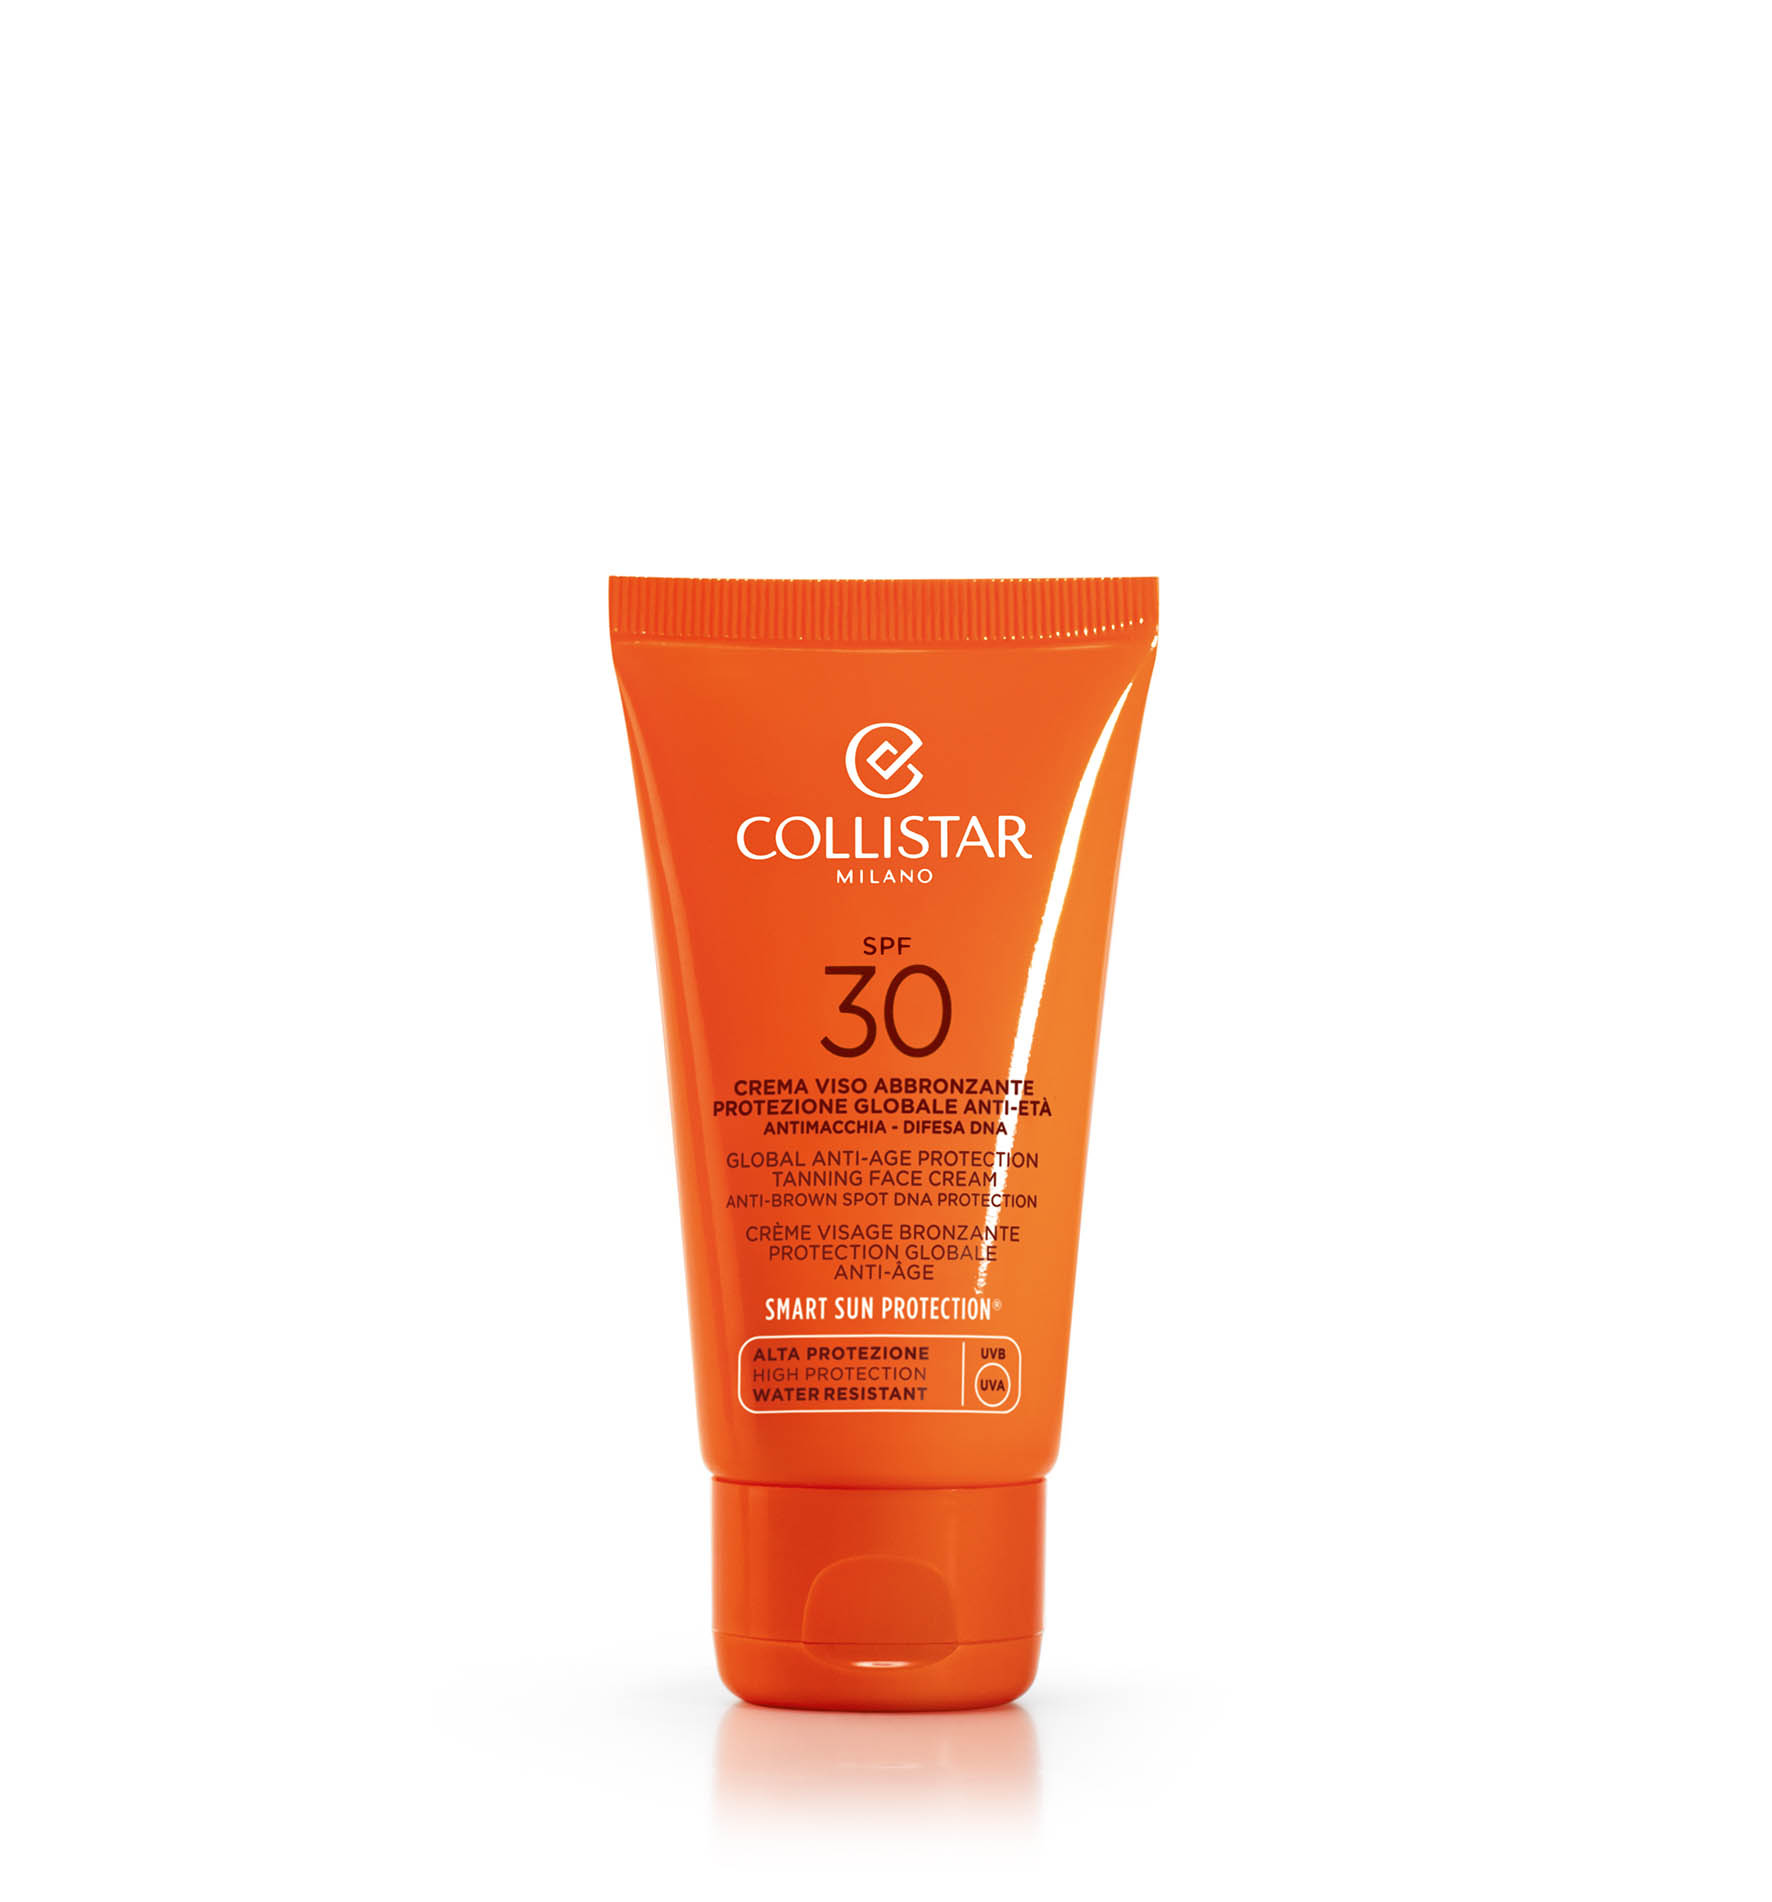 GLOBAL ANTI-AGE PROTECTION TANNING FACE CREAM SPF 30 - Face | Collistar - Shop Online Ufficiale